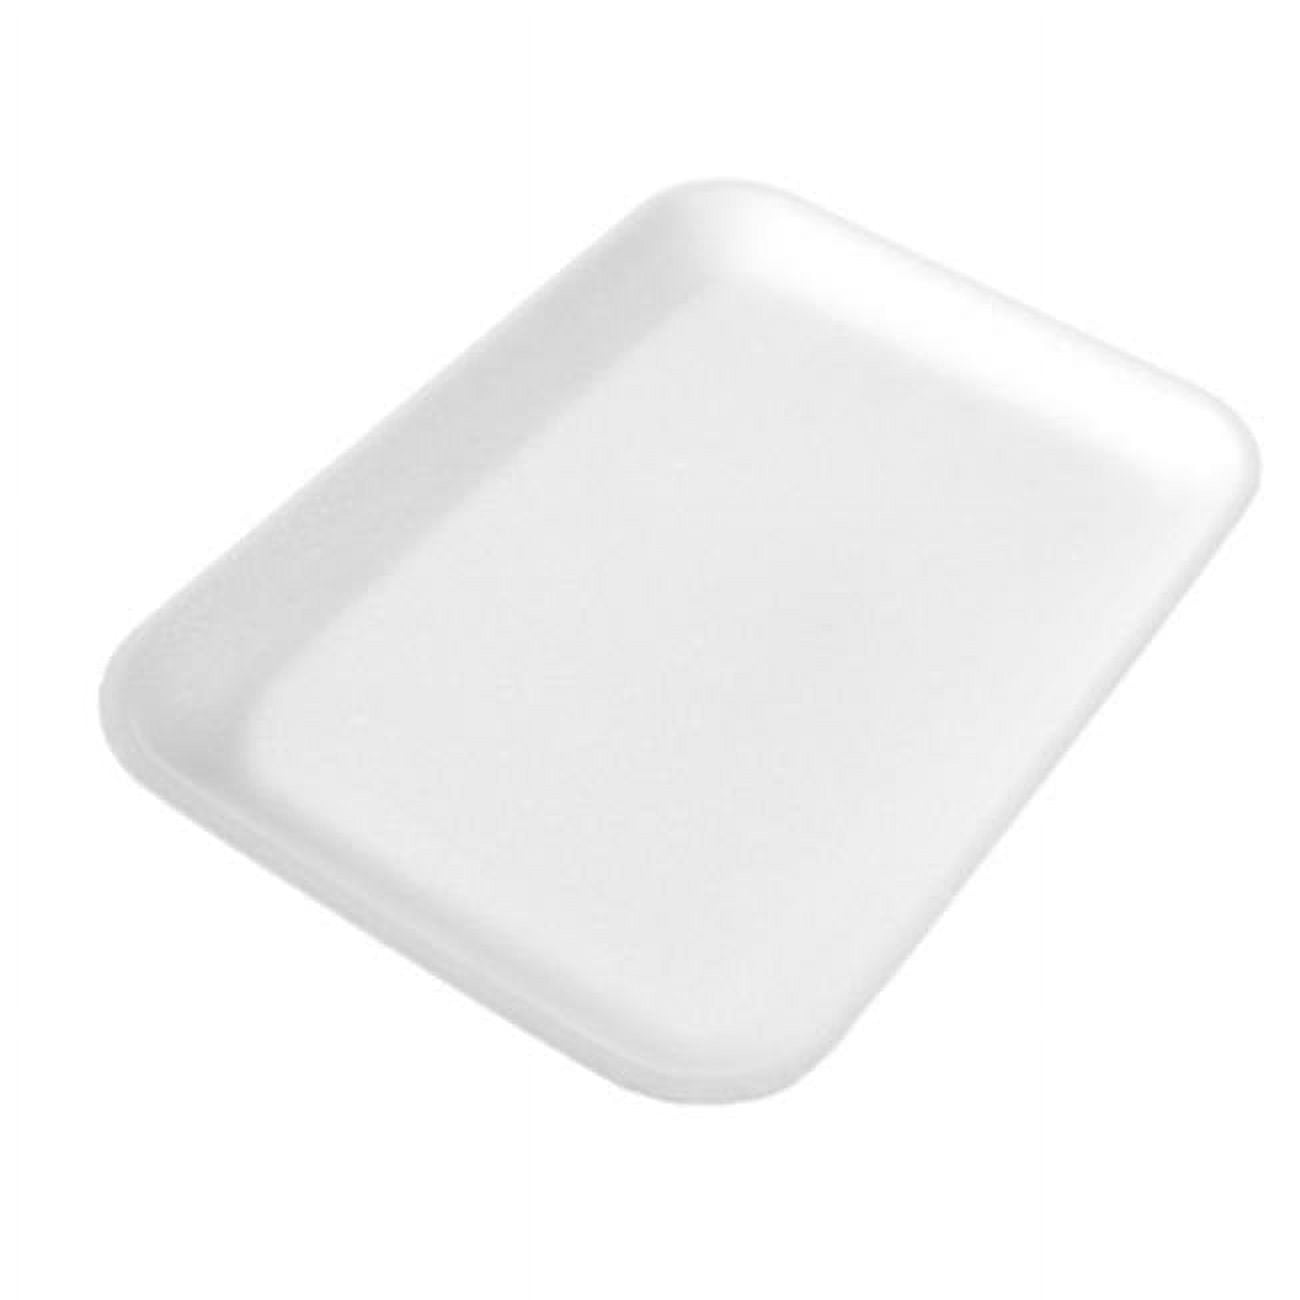 BYLD - White Foam Meat Trays, Small Square 1S - 5.2 x 5.2 - Bulk Pack of  100, Meat Packing - Disposable Styrofoam Trays